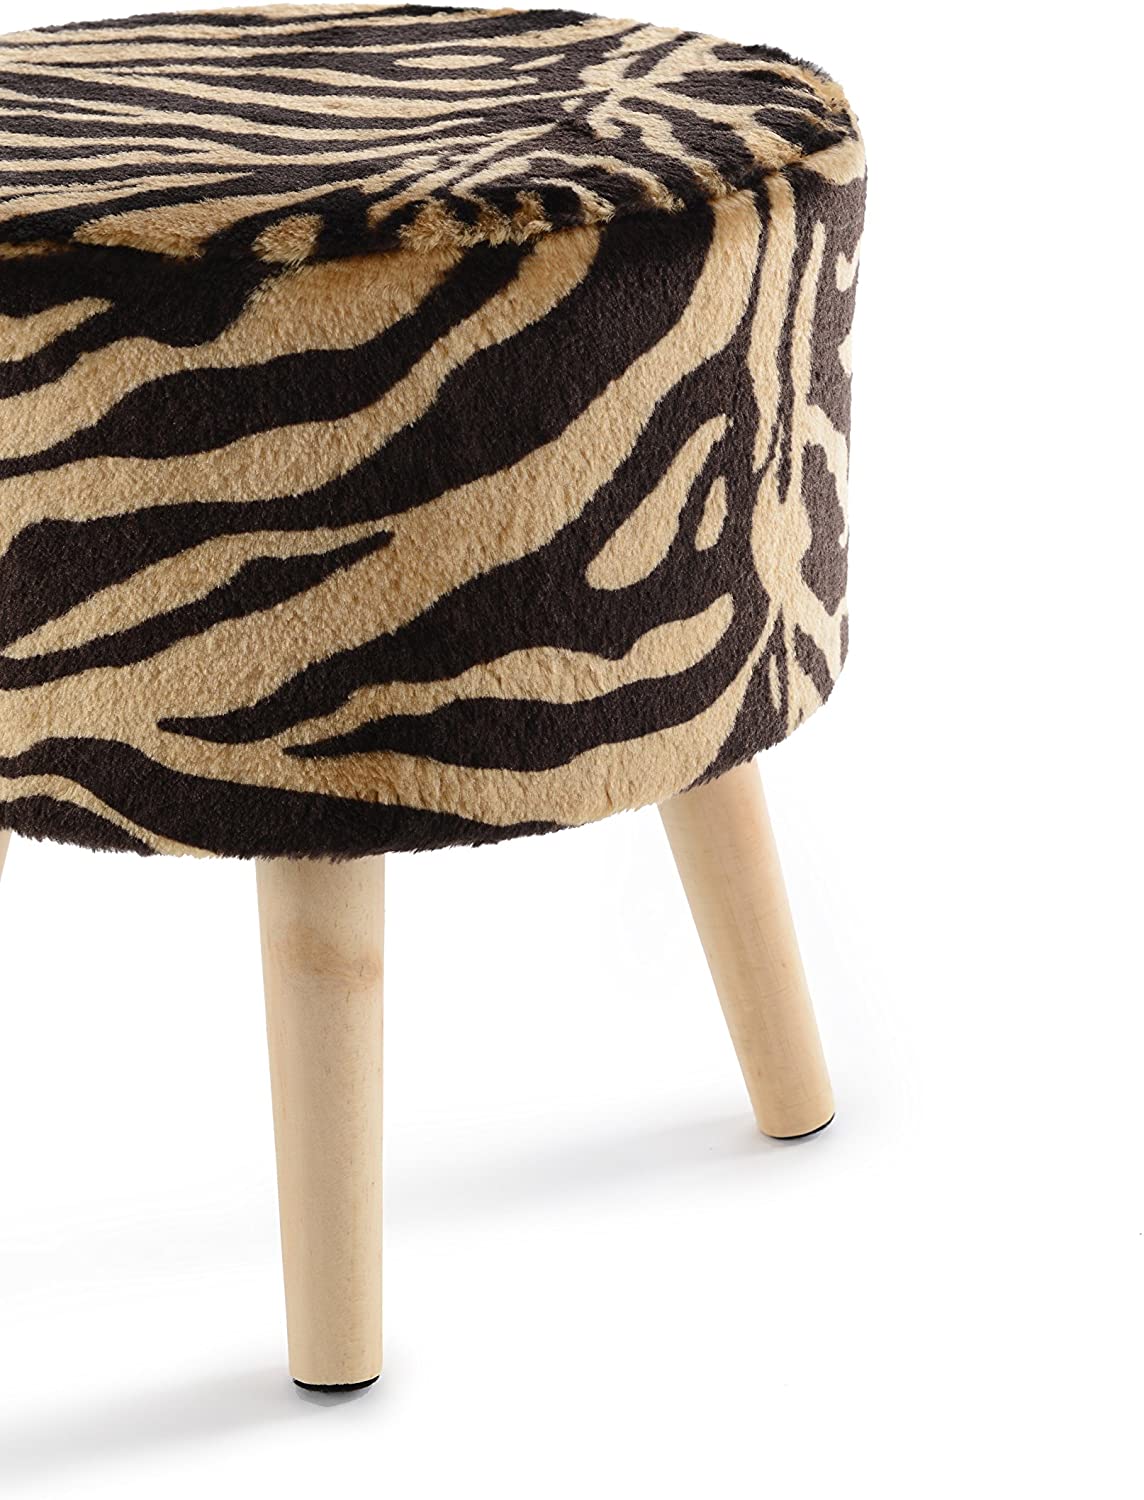 Collection Tiger Stripe Ottoman and Footstool 13" Round Decorative Faux Fur Stool